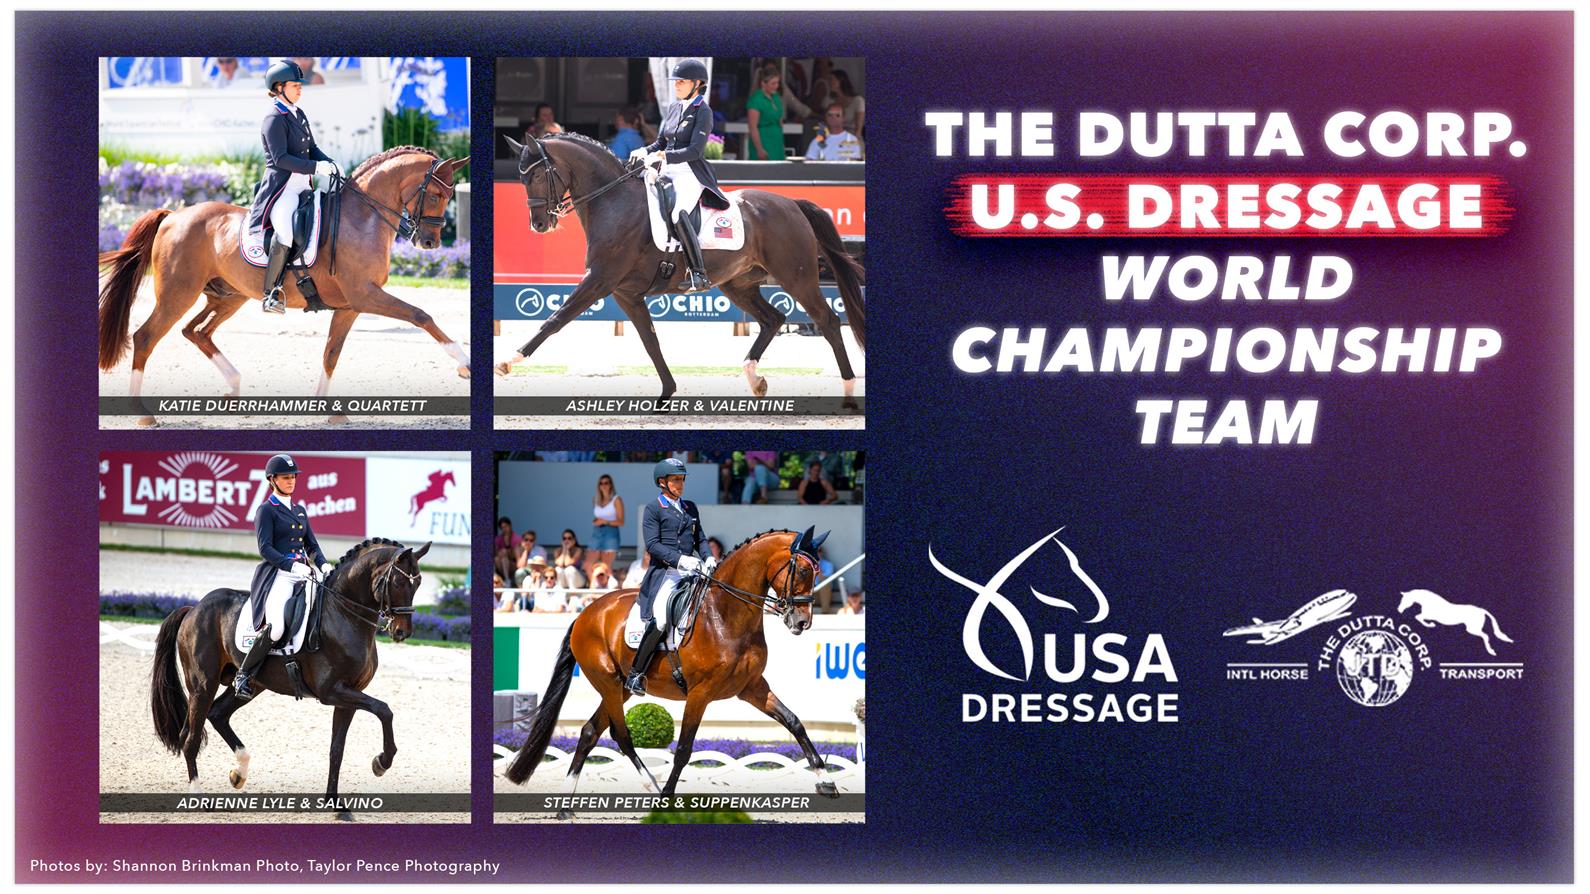 U.S. Dressage Team for the 2022 FEI World Championships